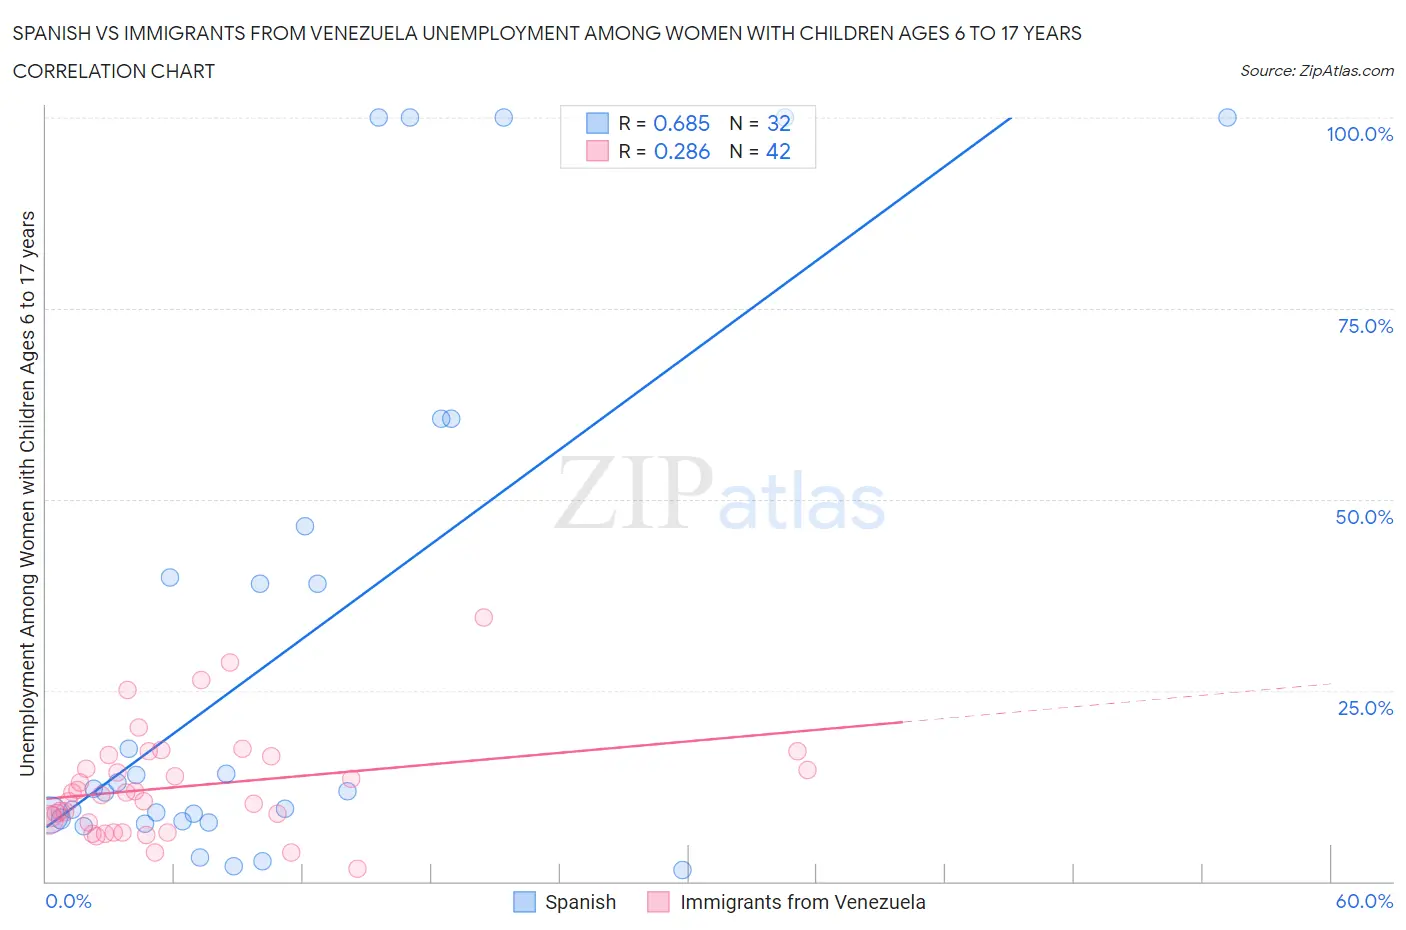 Spanish vs Immigrants from Venezuela Unemployment Among Women with Children Ages 6 to 17 years